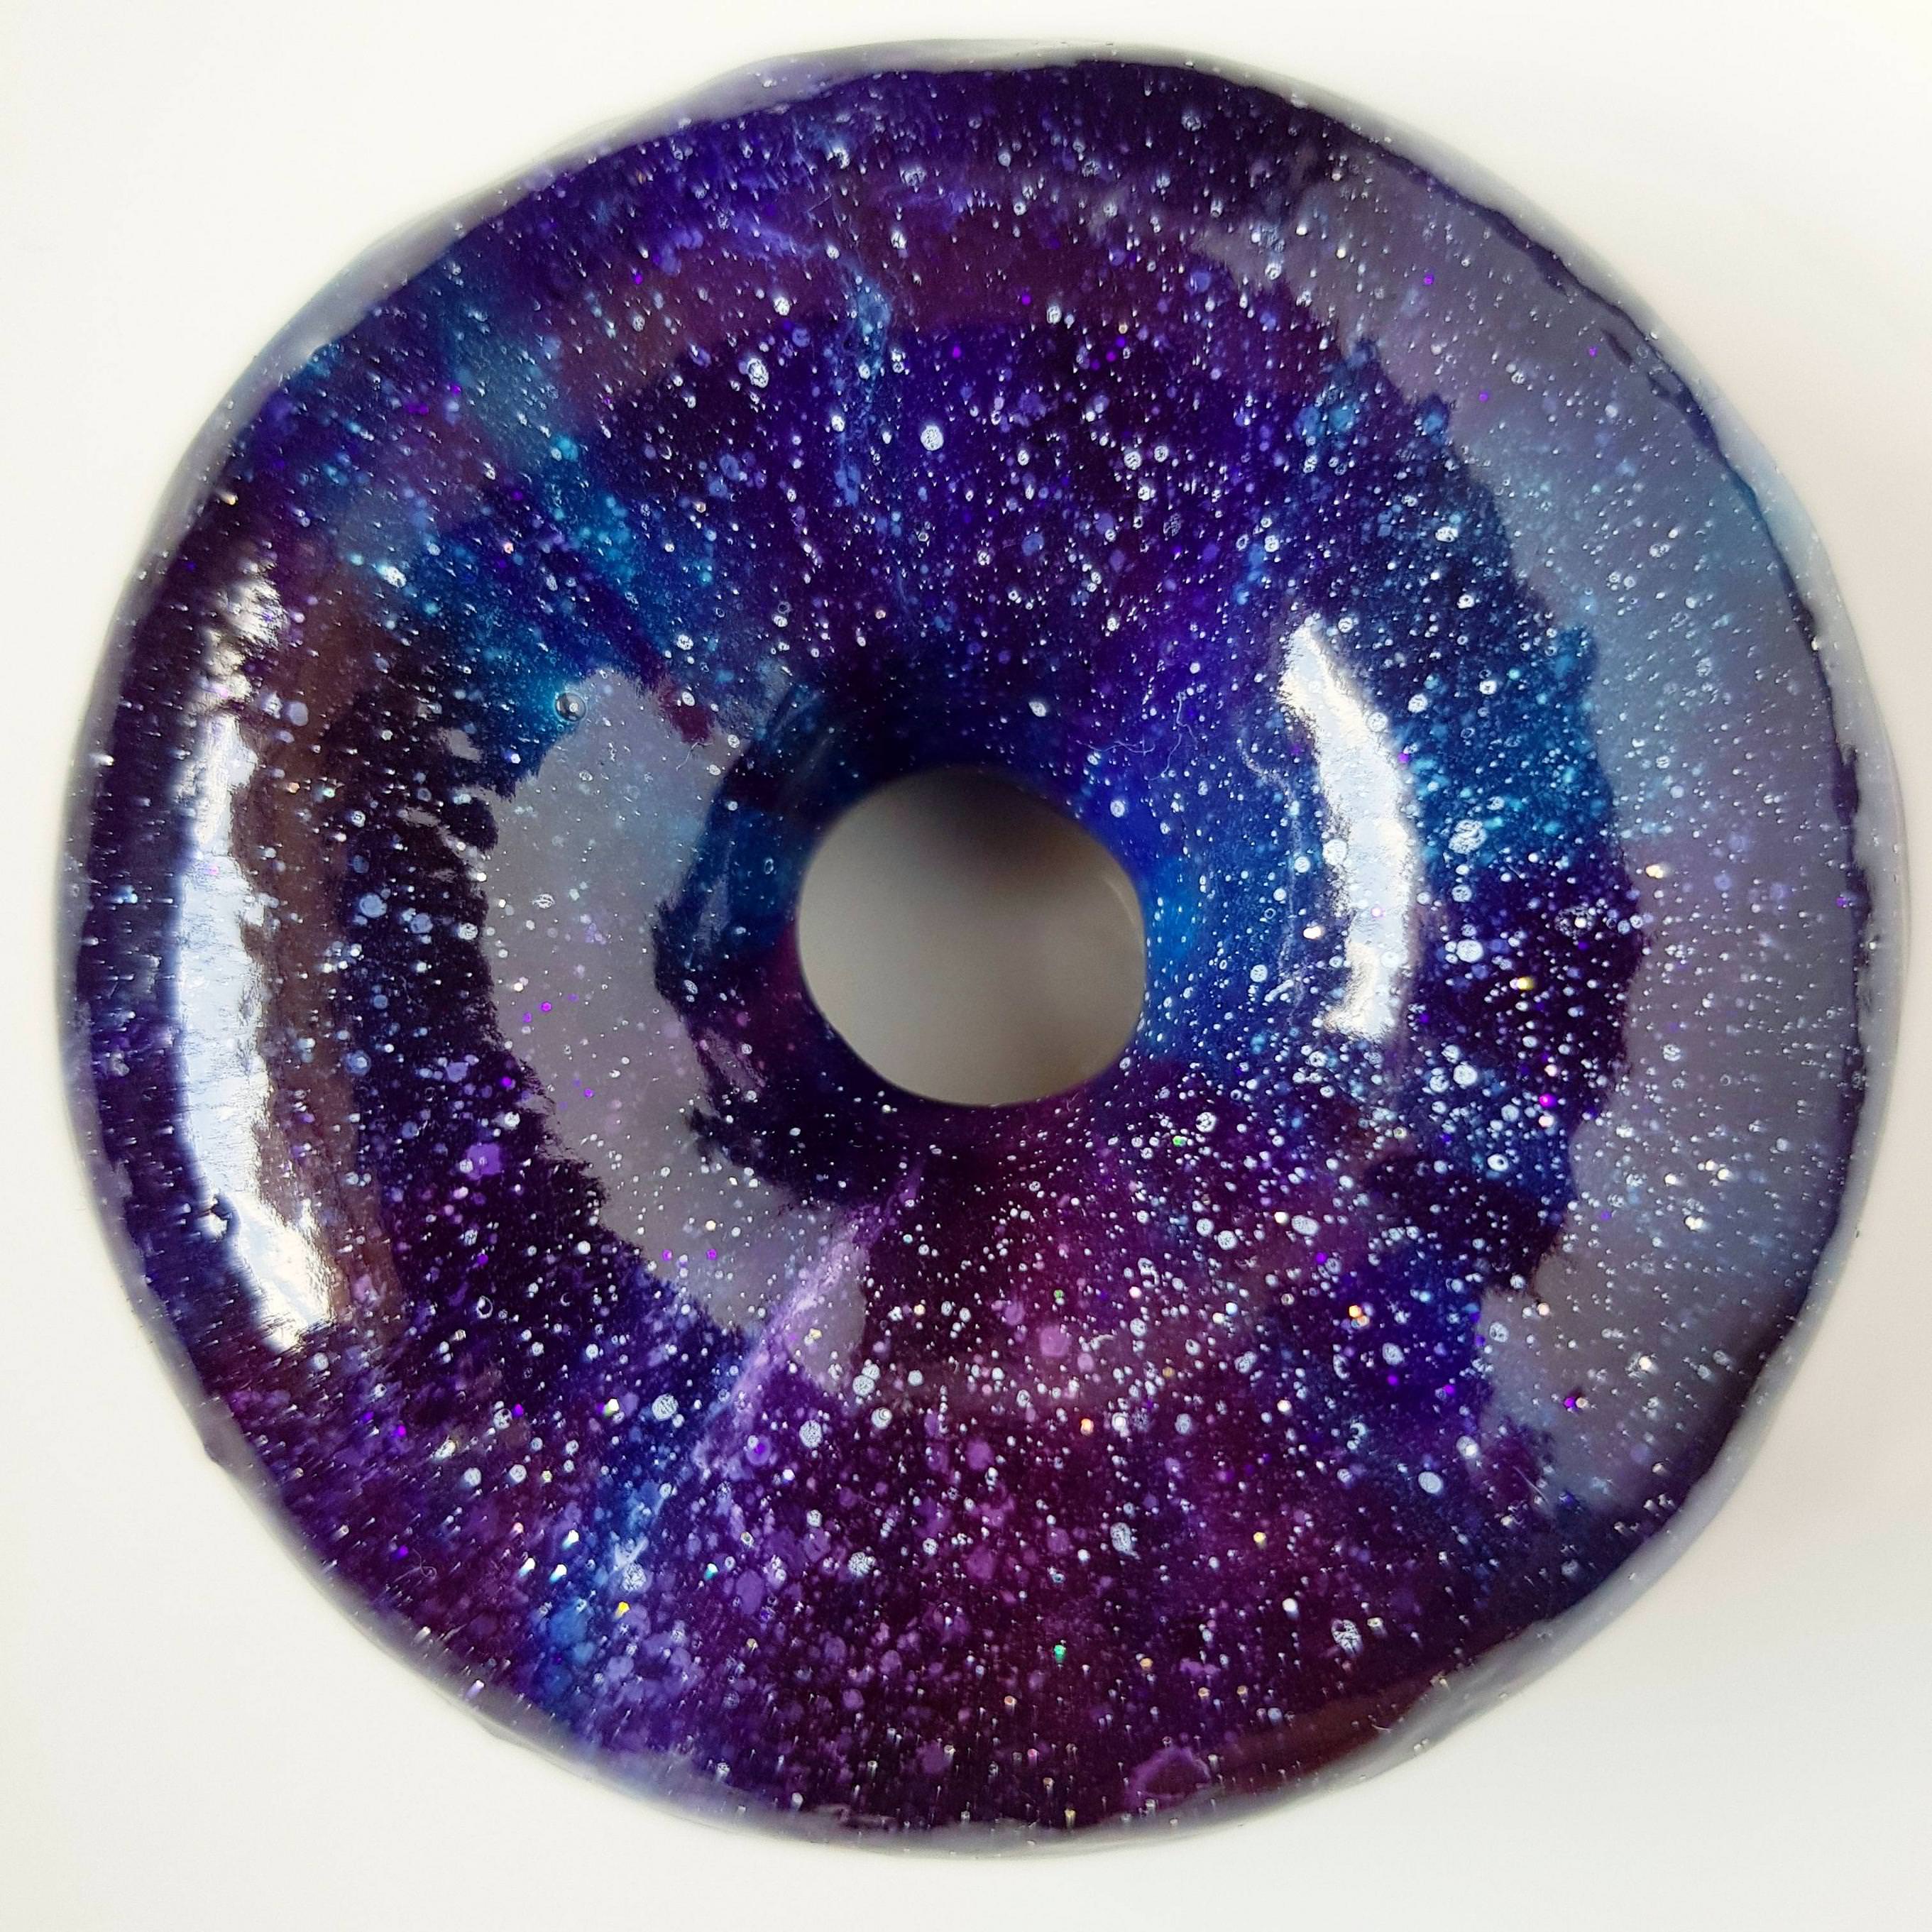 A Fellow Redditor Cooked Up The Galaxy Donut. Wanna Bite?